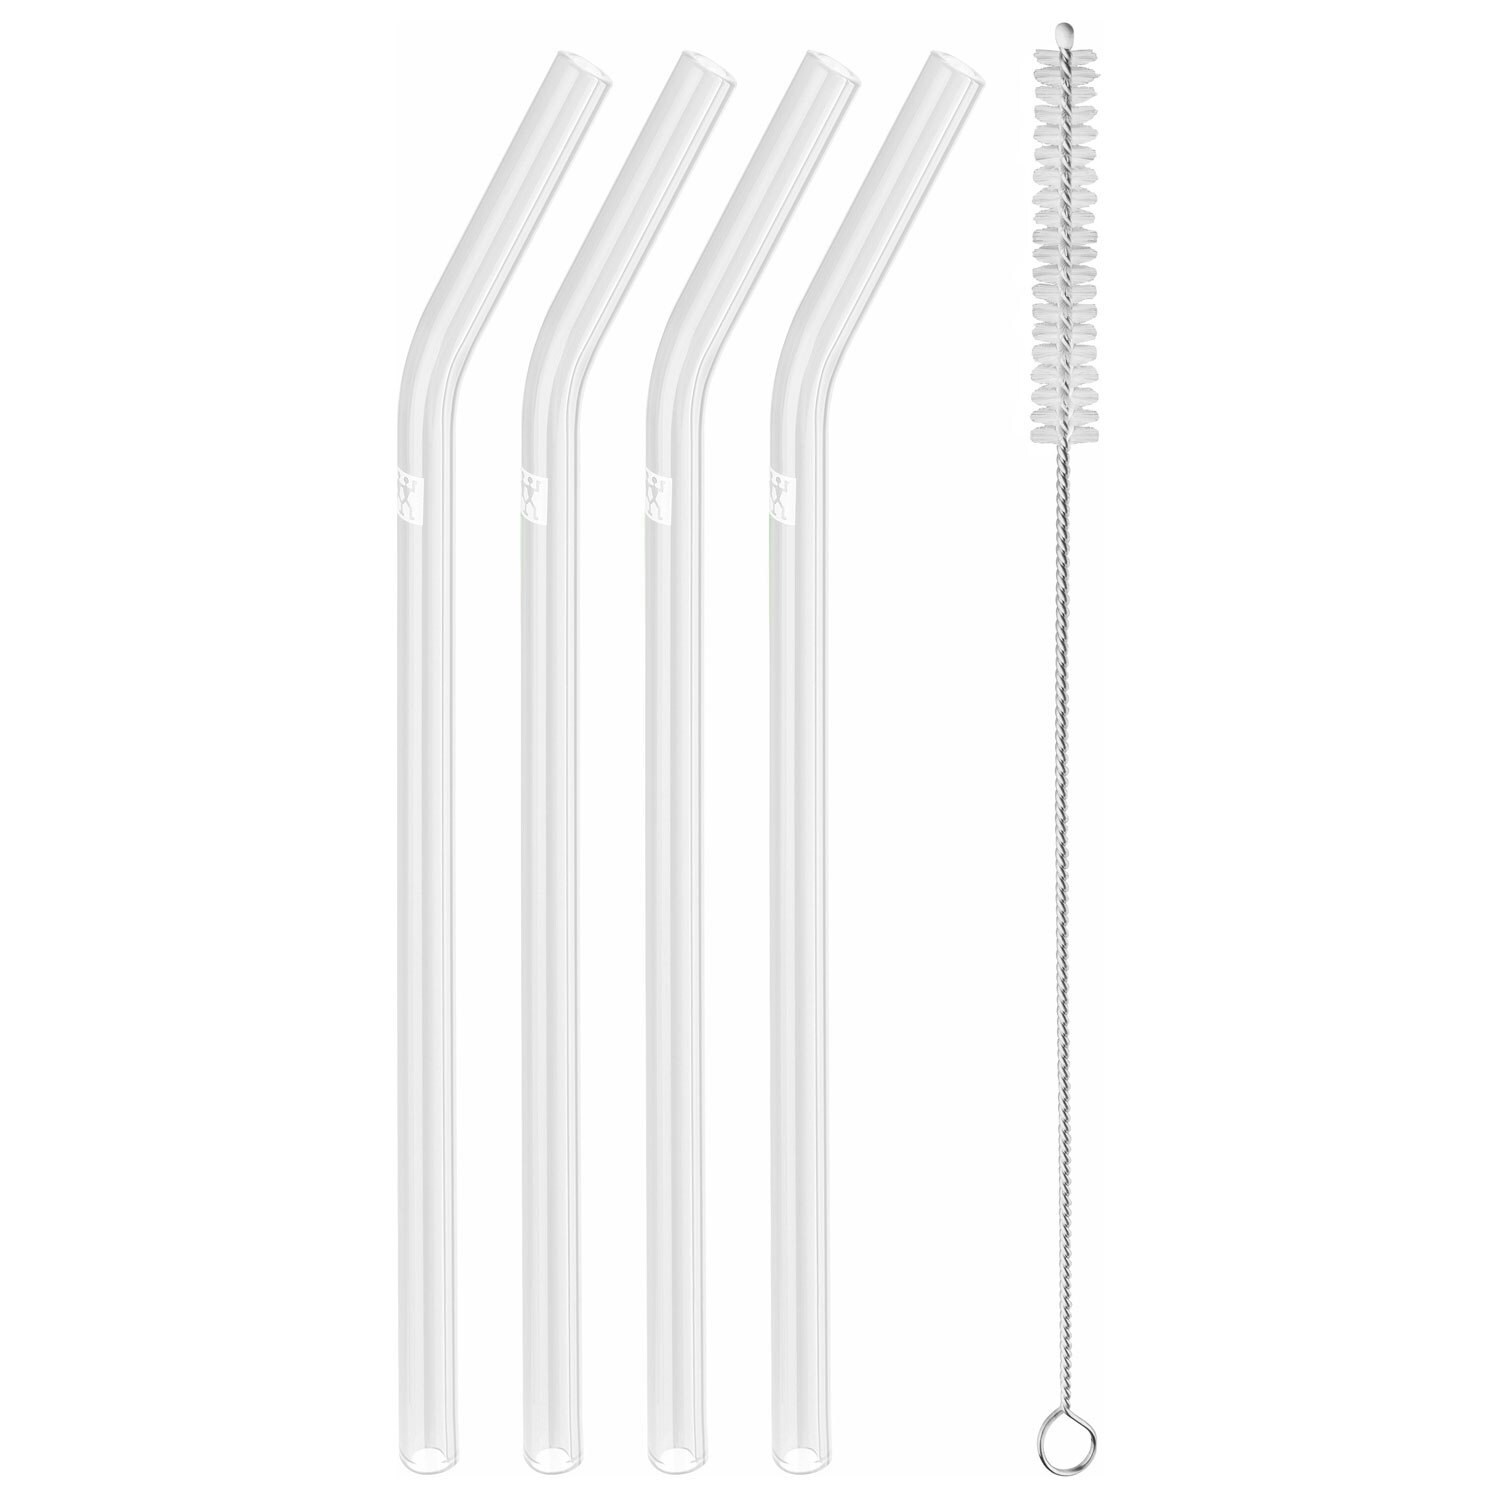 Peak Straws and small cleaning brush (4 PK) - Orrefors Crystal